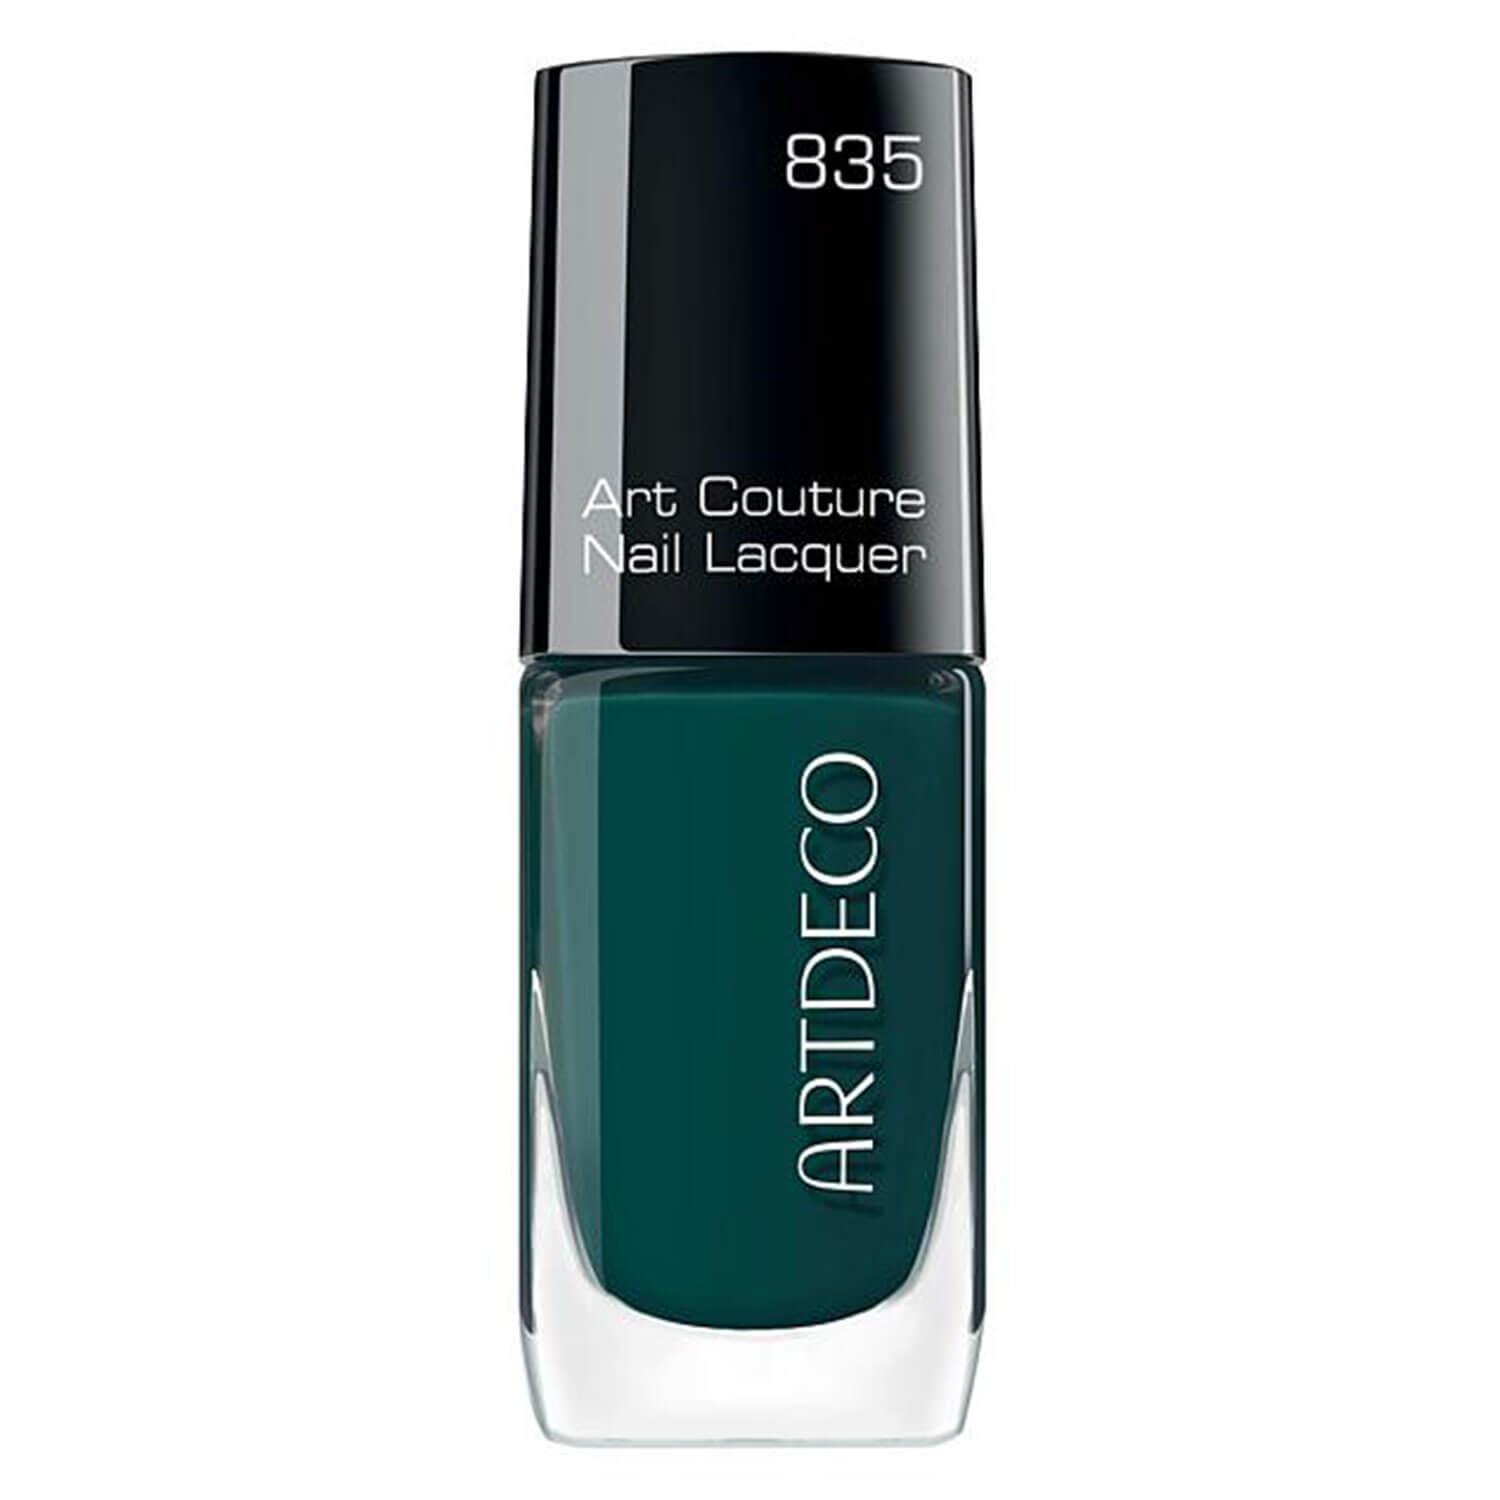 Art Couture - Nail Lacquer Ivy Green 835